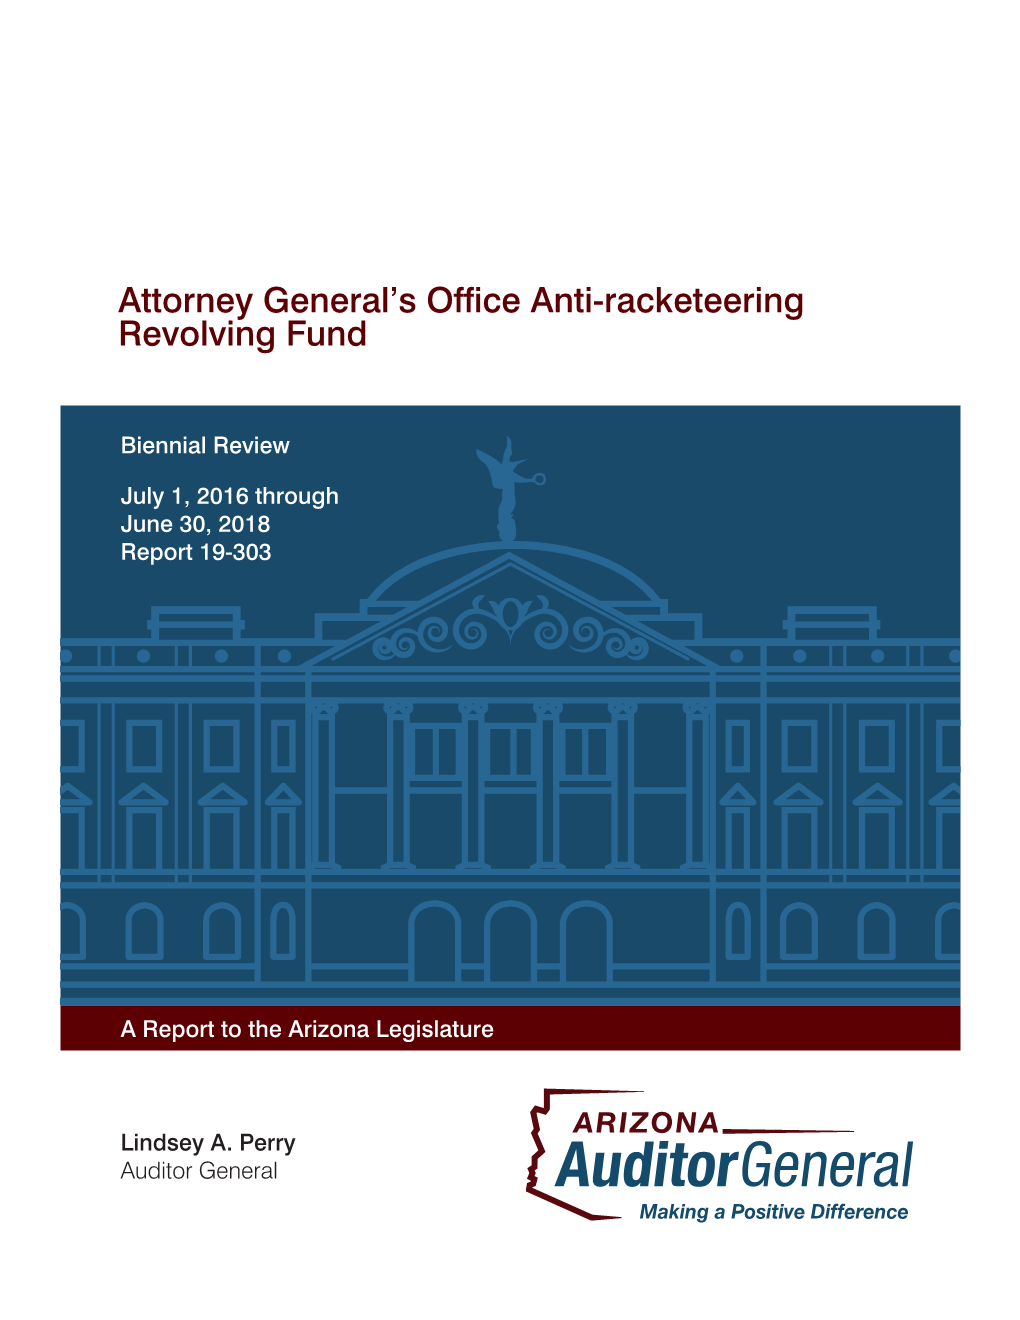 Attorney General's Office Anti-Racketeering Revolving Fund | March 2019 | Report 19-303